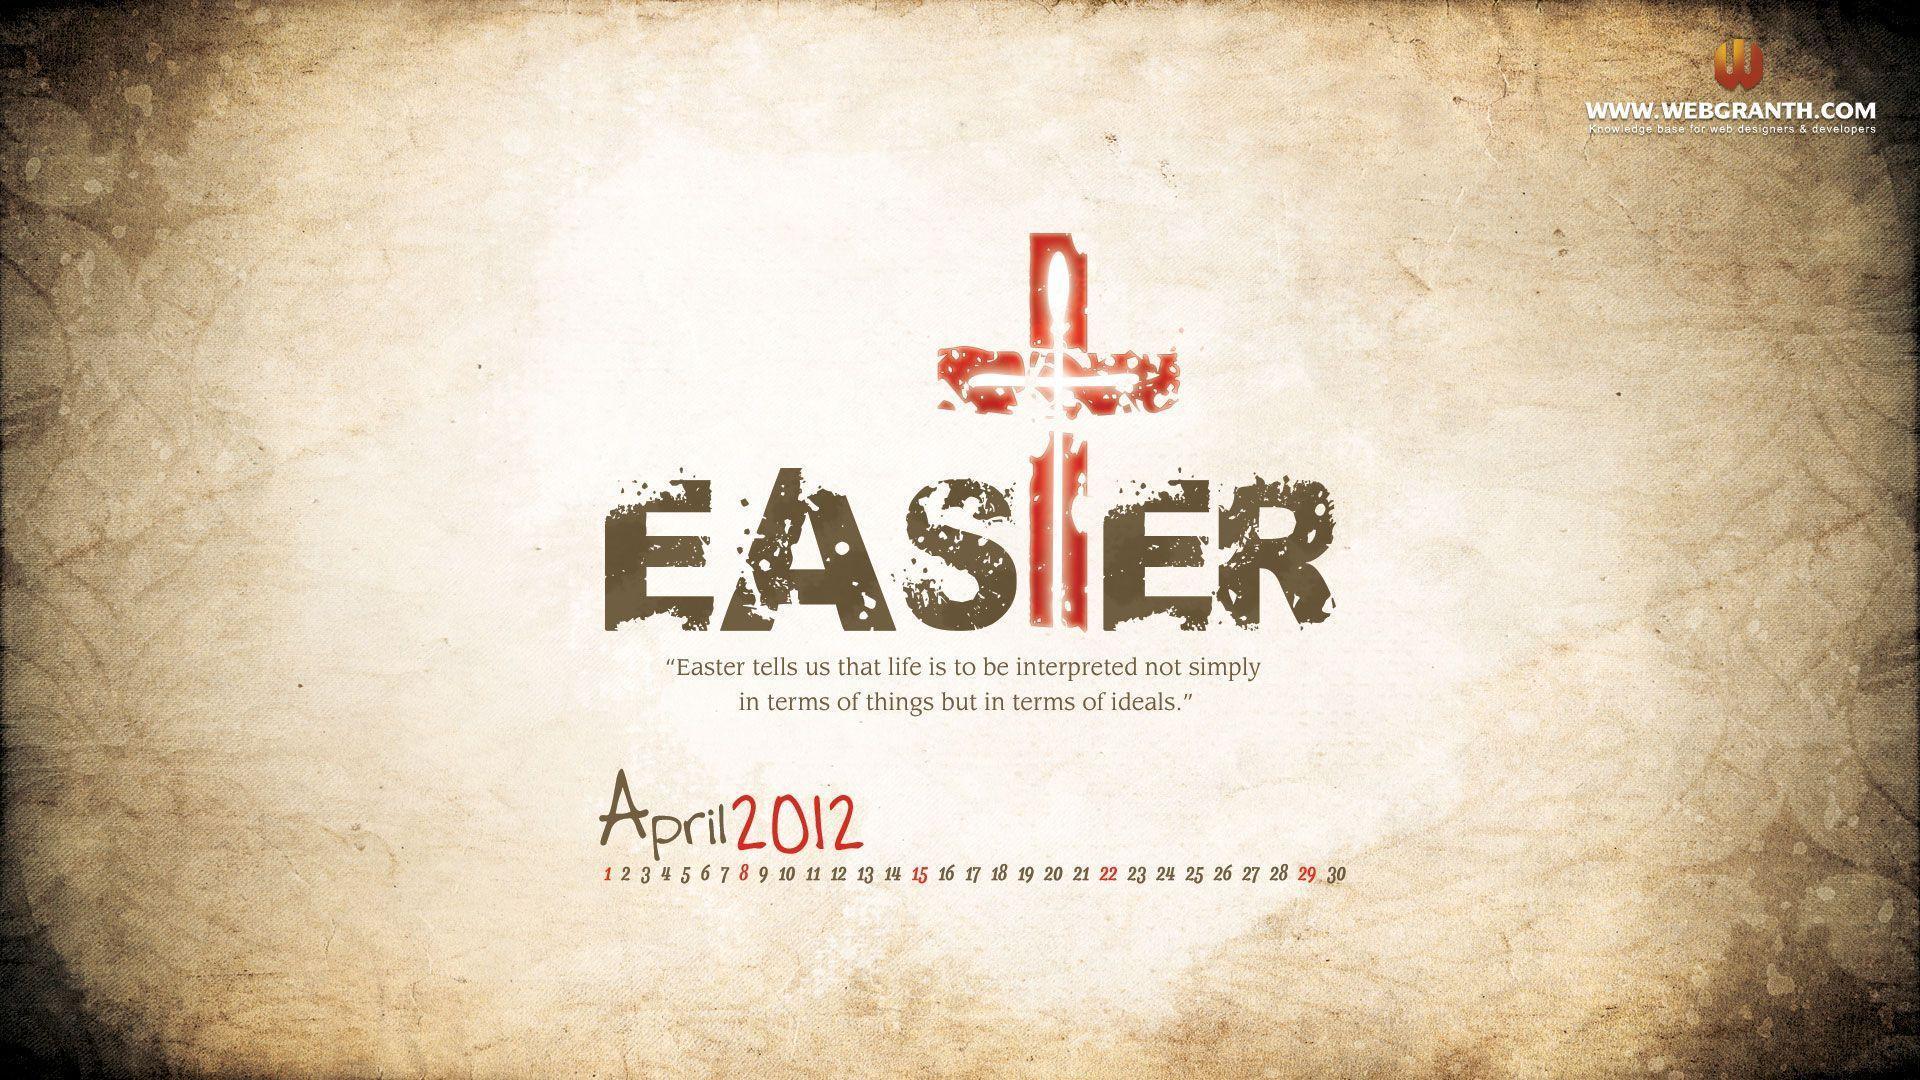 Easter Wallpaper, Happy Easter Wallpaper 2012 with Calendar